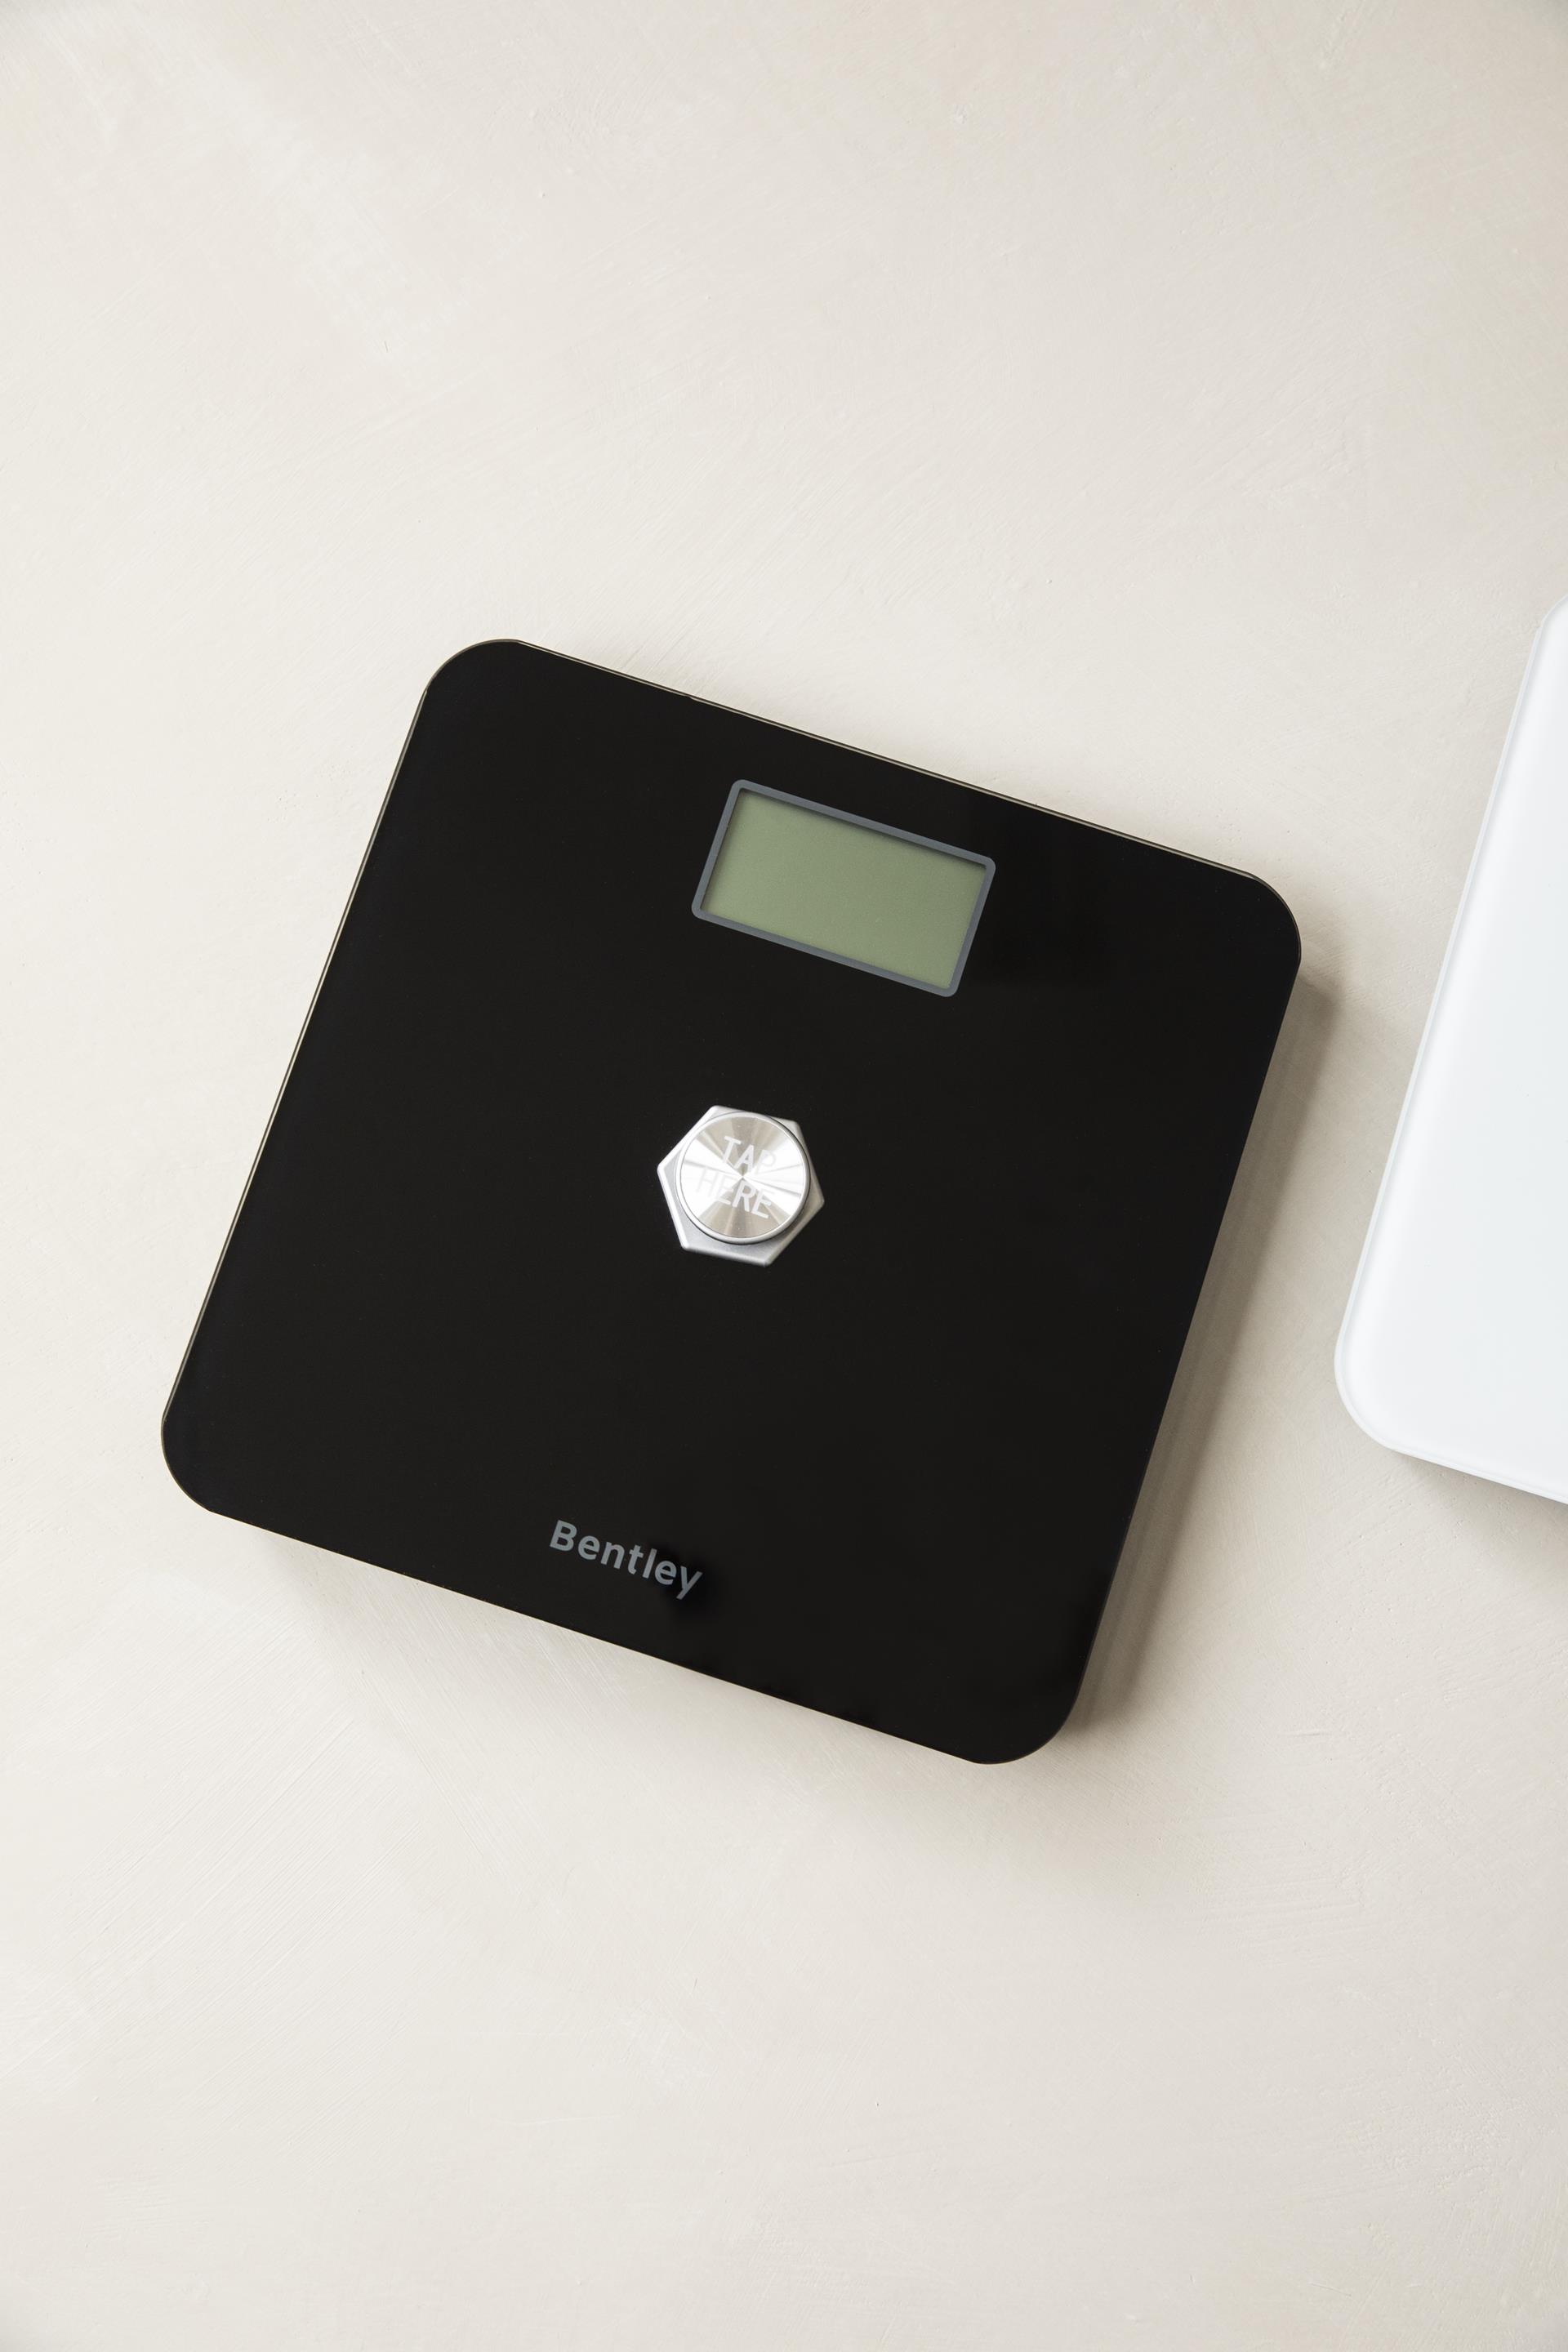       Cindy+ personal scale battery free